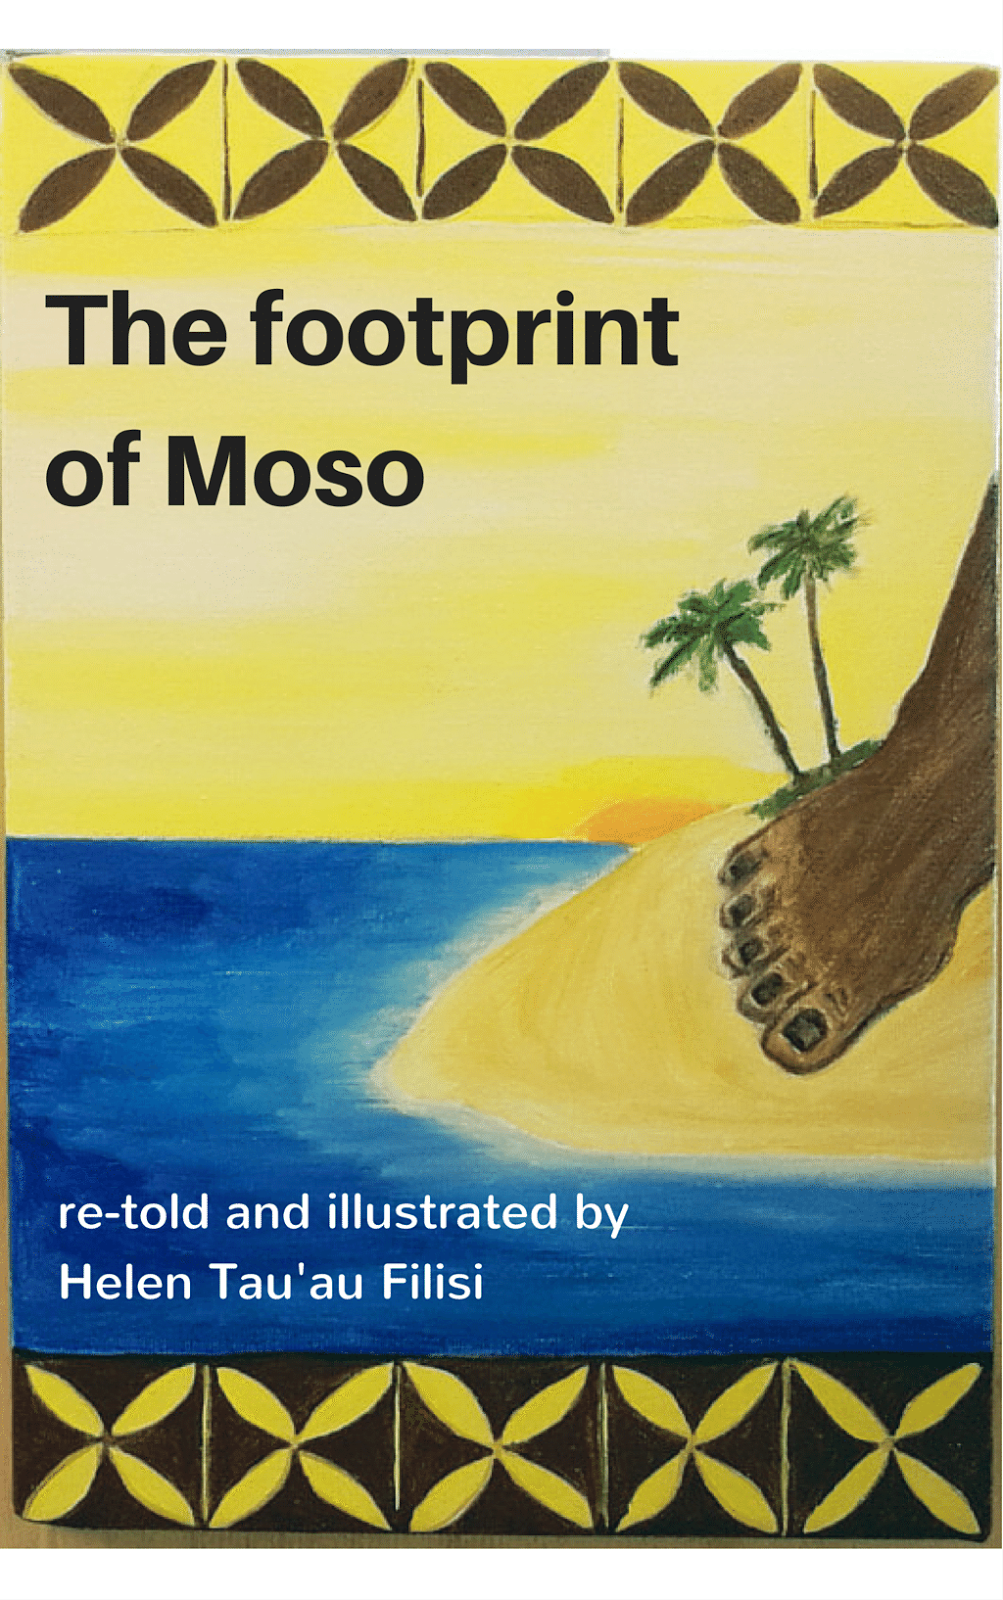 THE FOOTPRINT OF MOSO (A4 PORTRAIT)